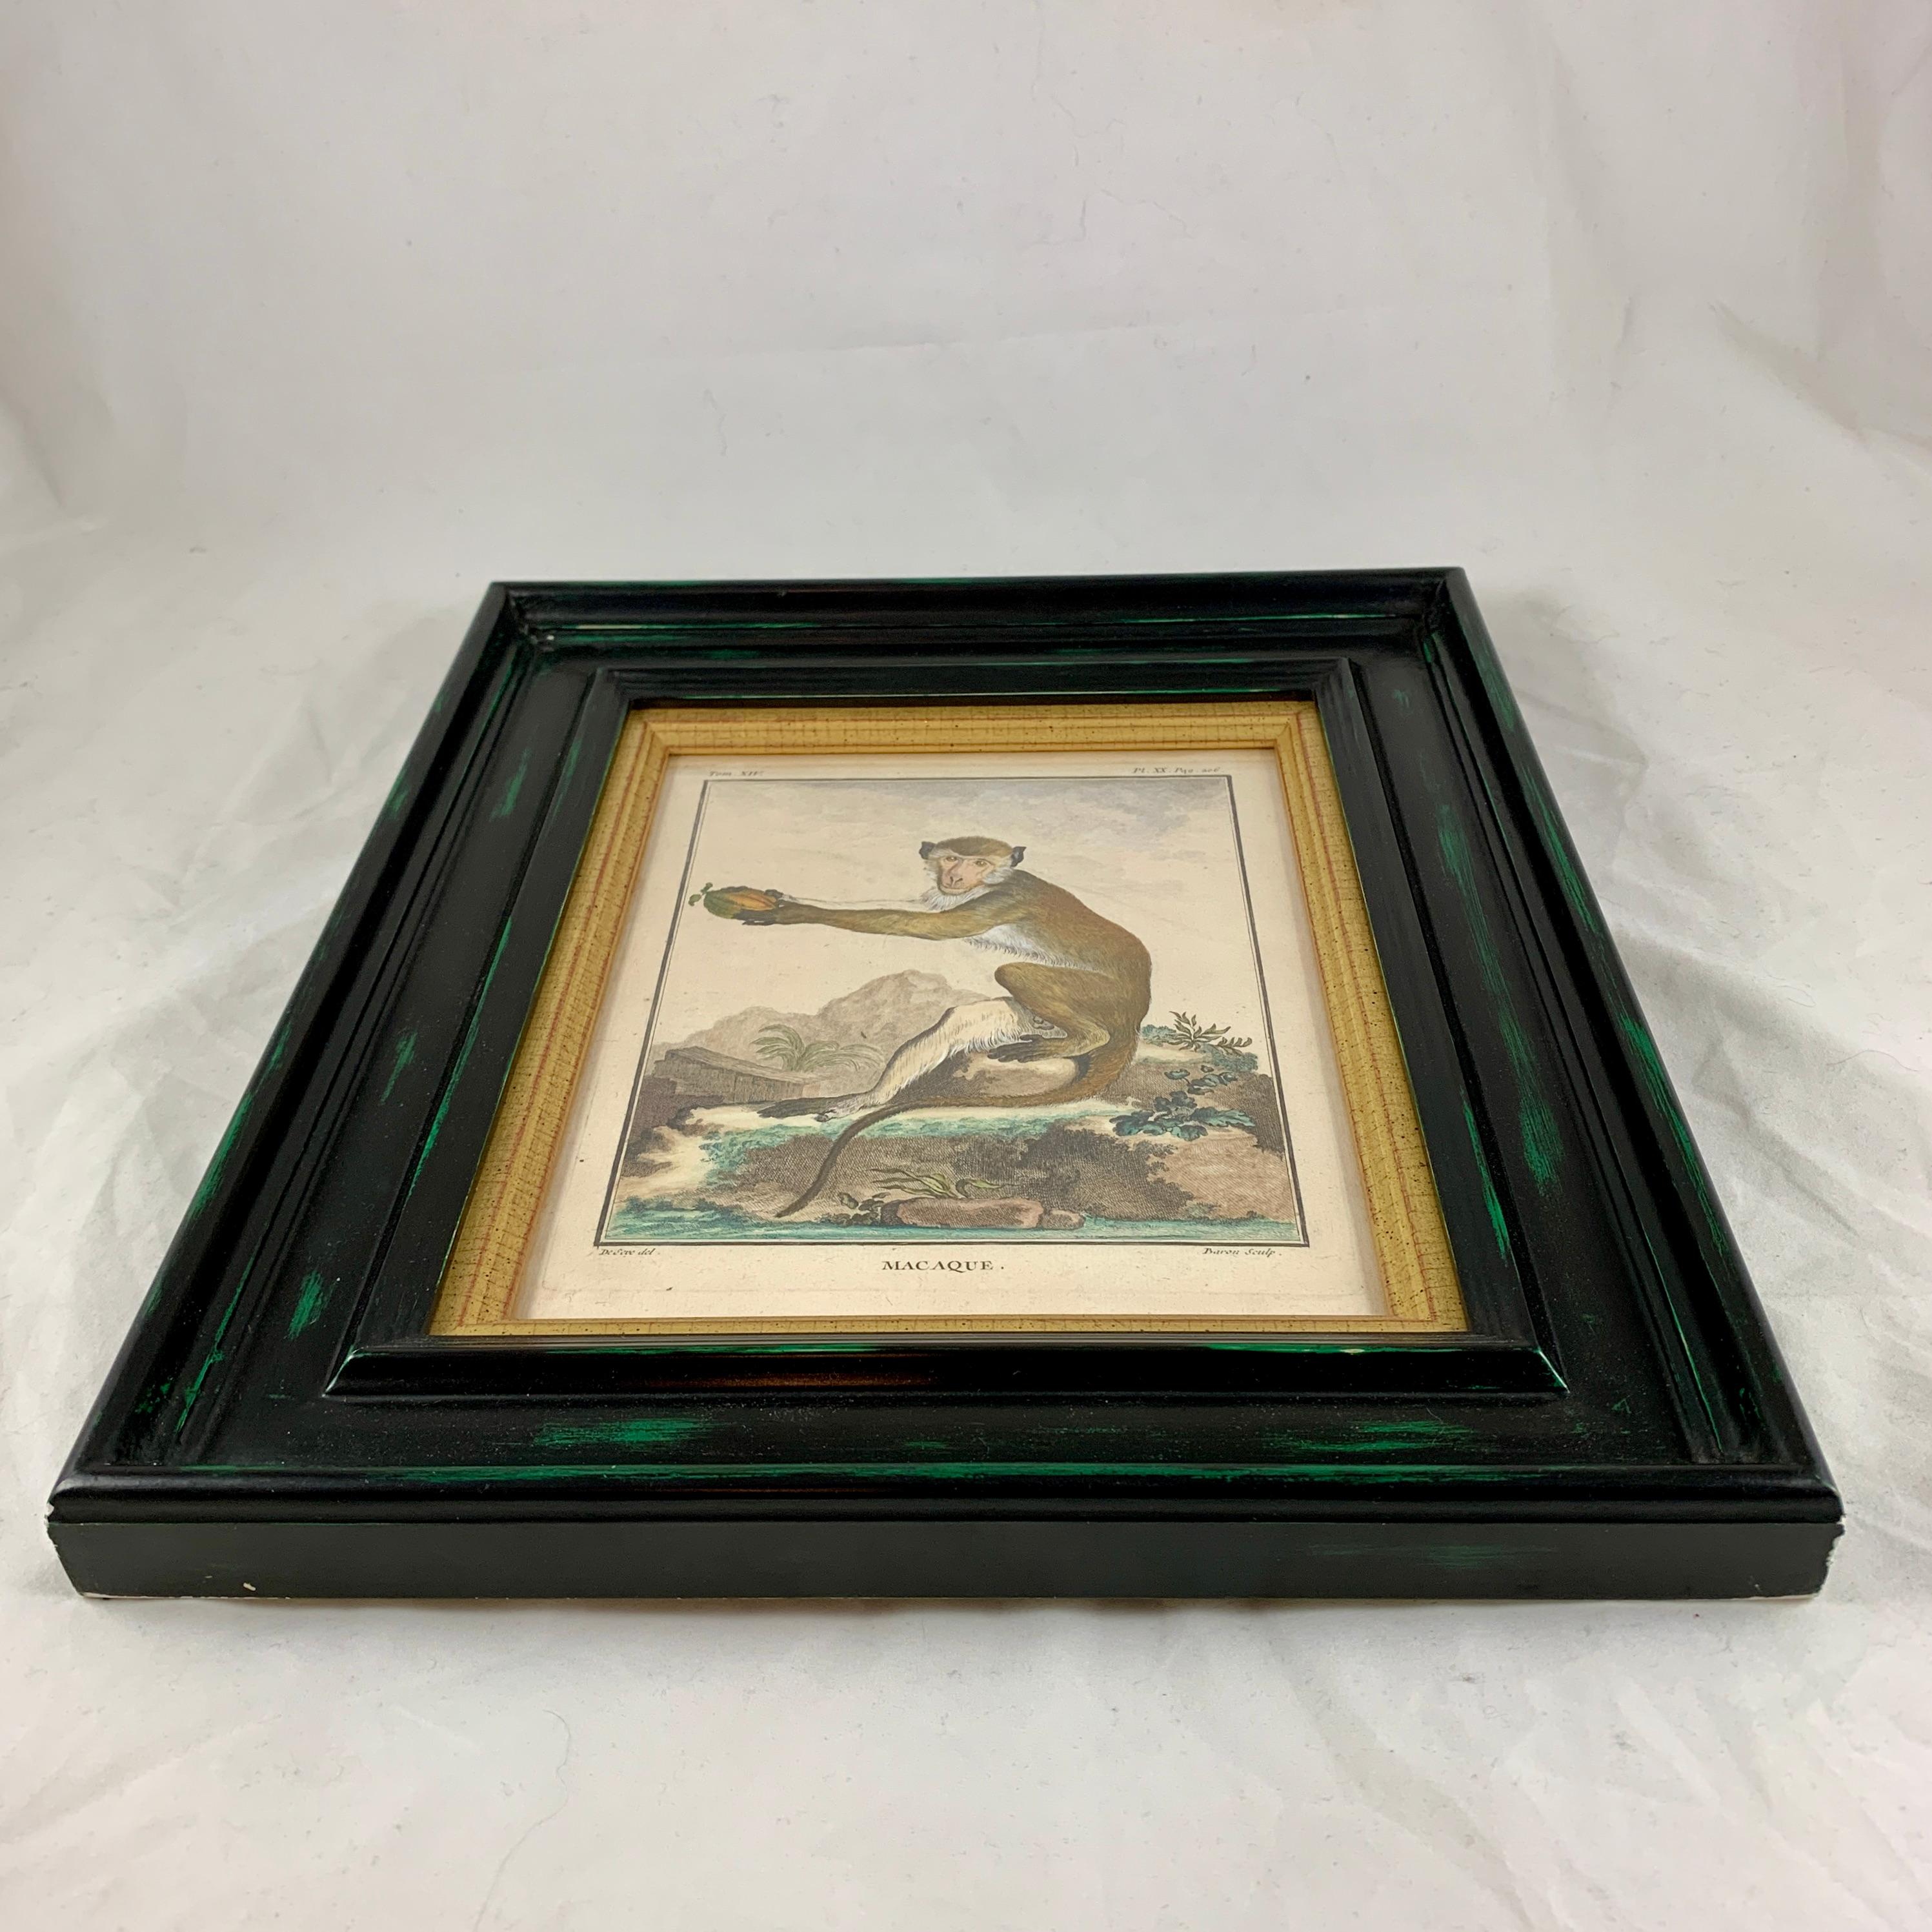 Hand-Painted Framed 18th Century Comte de Buffon Old World Monkey French Engraving, Macaque For Sale